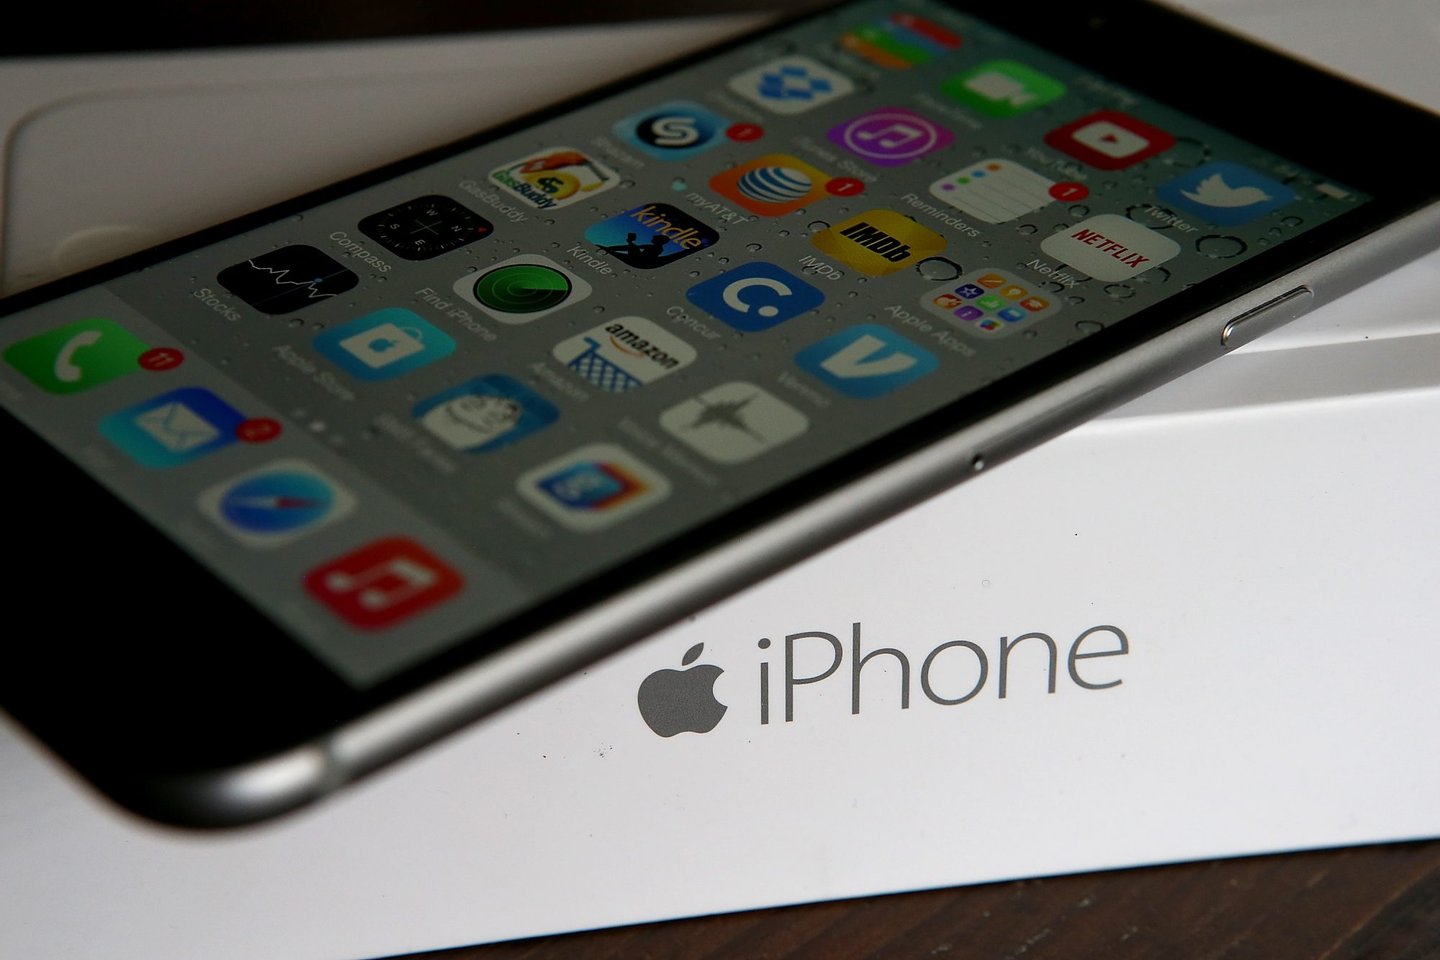 SAN ANSELMO, CA - JANUARY 27: An Apple iPhone sits on a box on January 27, 2015 in San Anselmo, California. Apple Inc. reported huge first quarter earnings that were fueled by strong iPhone sales with revenue of $74.6 billion compared to $57.6 billion one year ago. (Photo Illustration by Justin Sullivan/Getty Images)